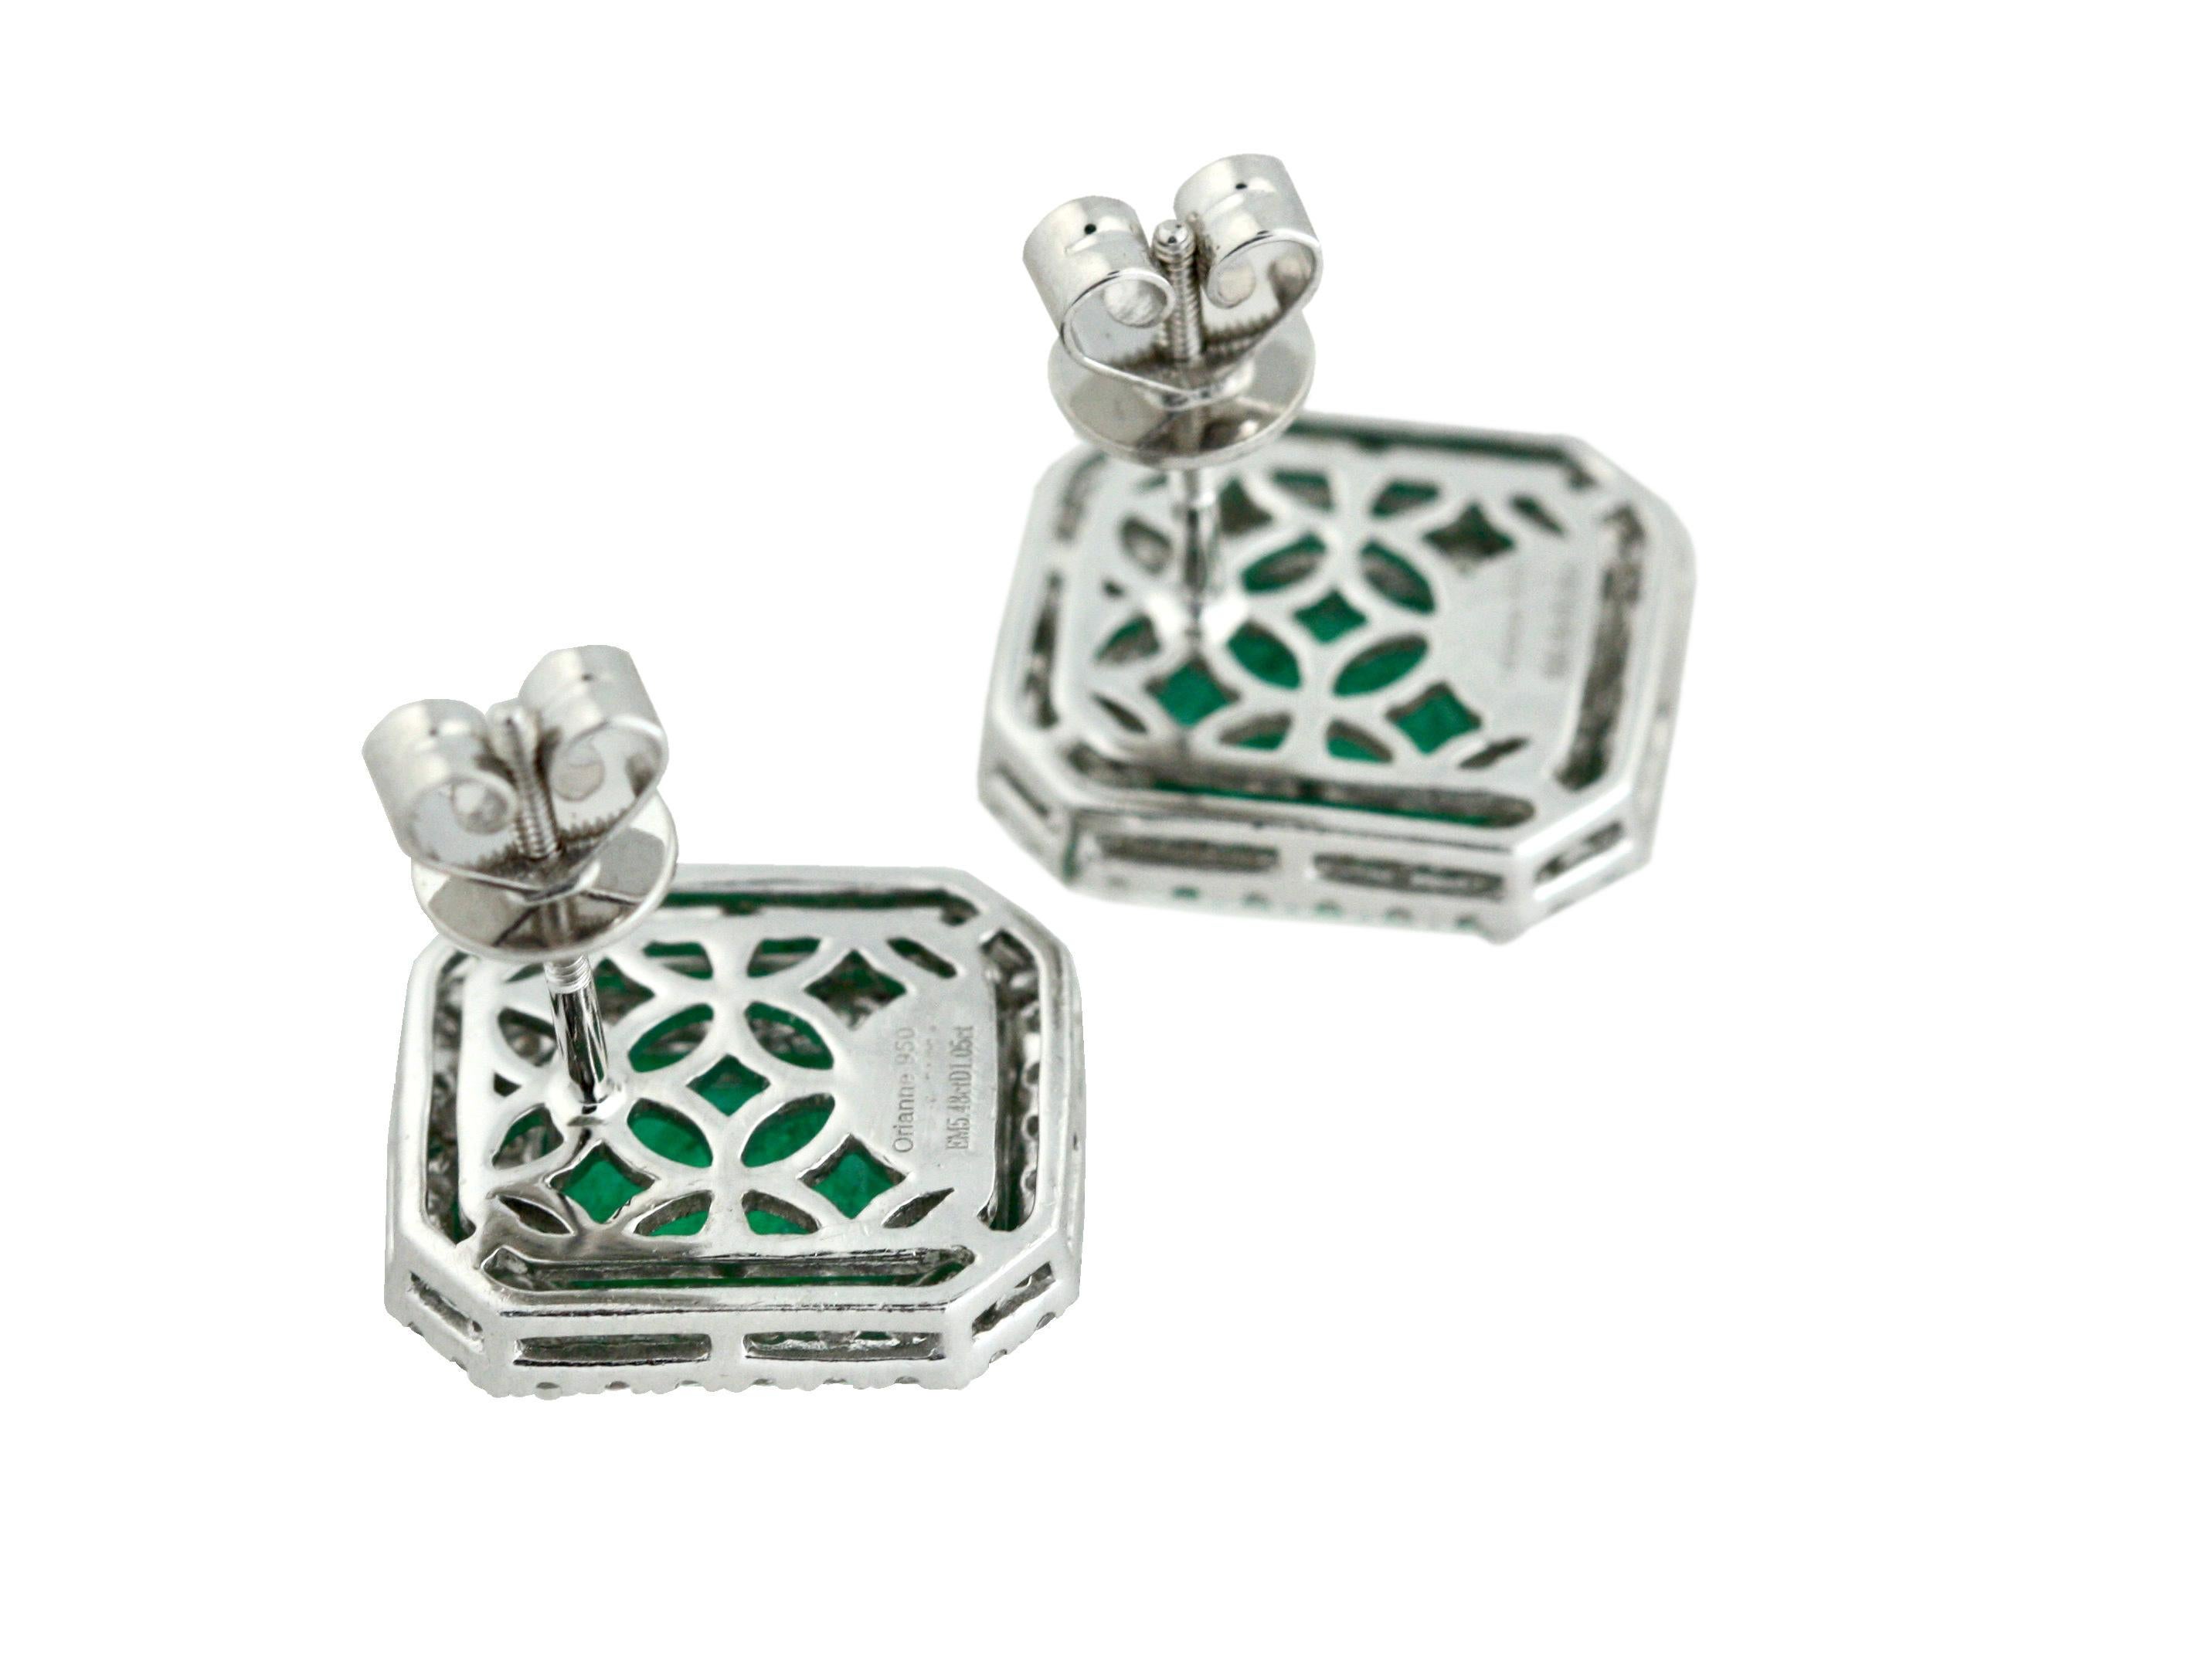 
Pair of Emerald and Diamond Earrings
Each of cluster design, set with a step-cut emerald within a border of circular-cut diamonds, post fittings, emeralds together weighing approximately 5.48 carats, diamonds weighing a total of approximately 1.05